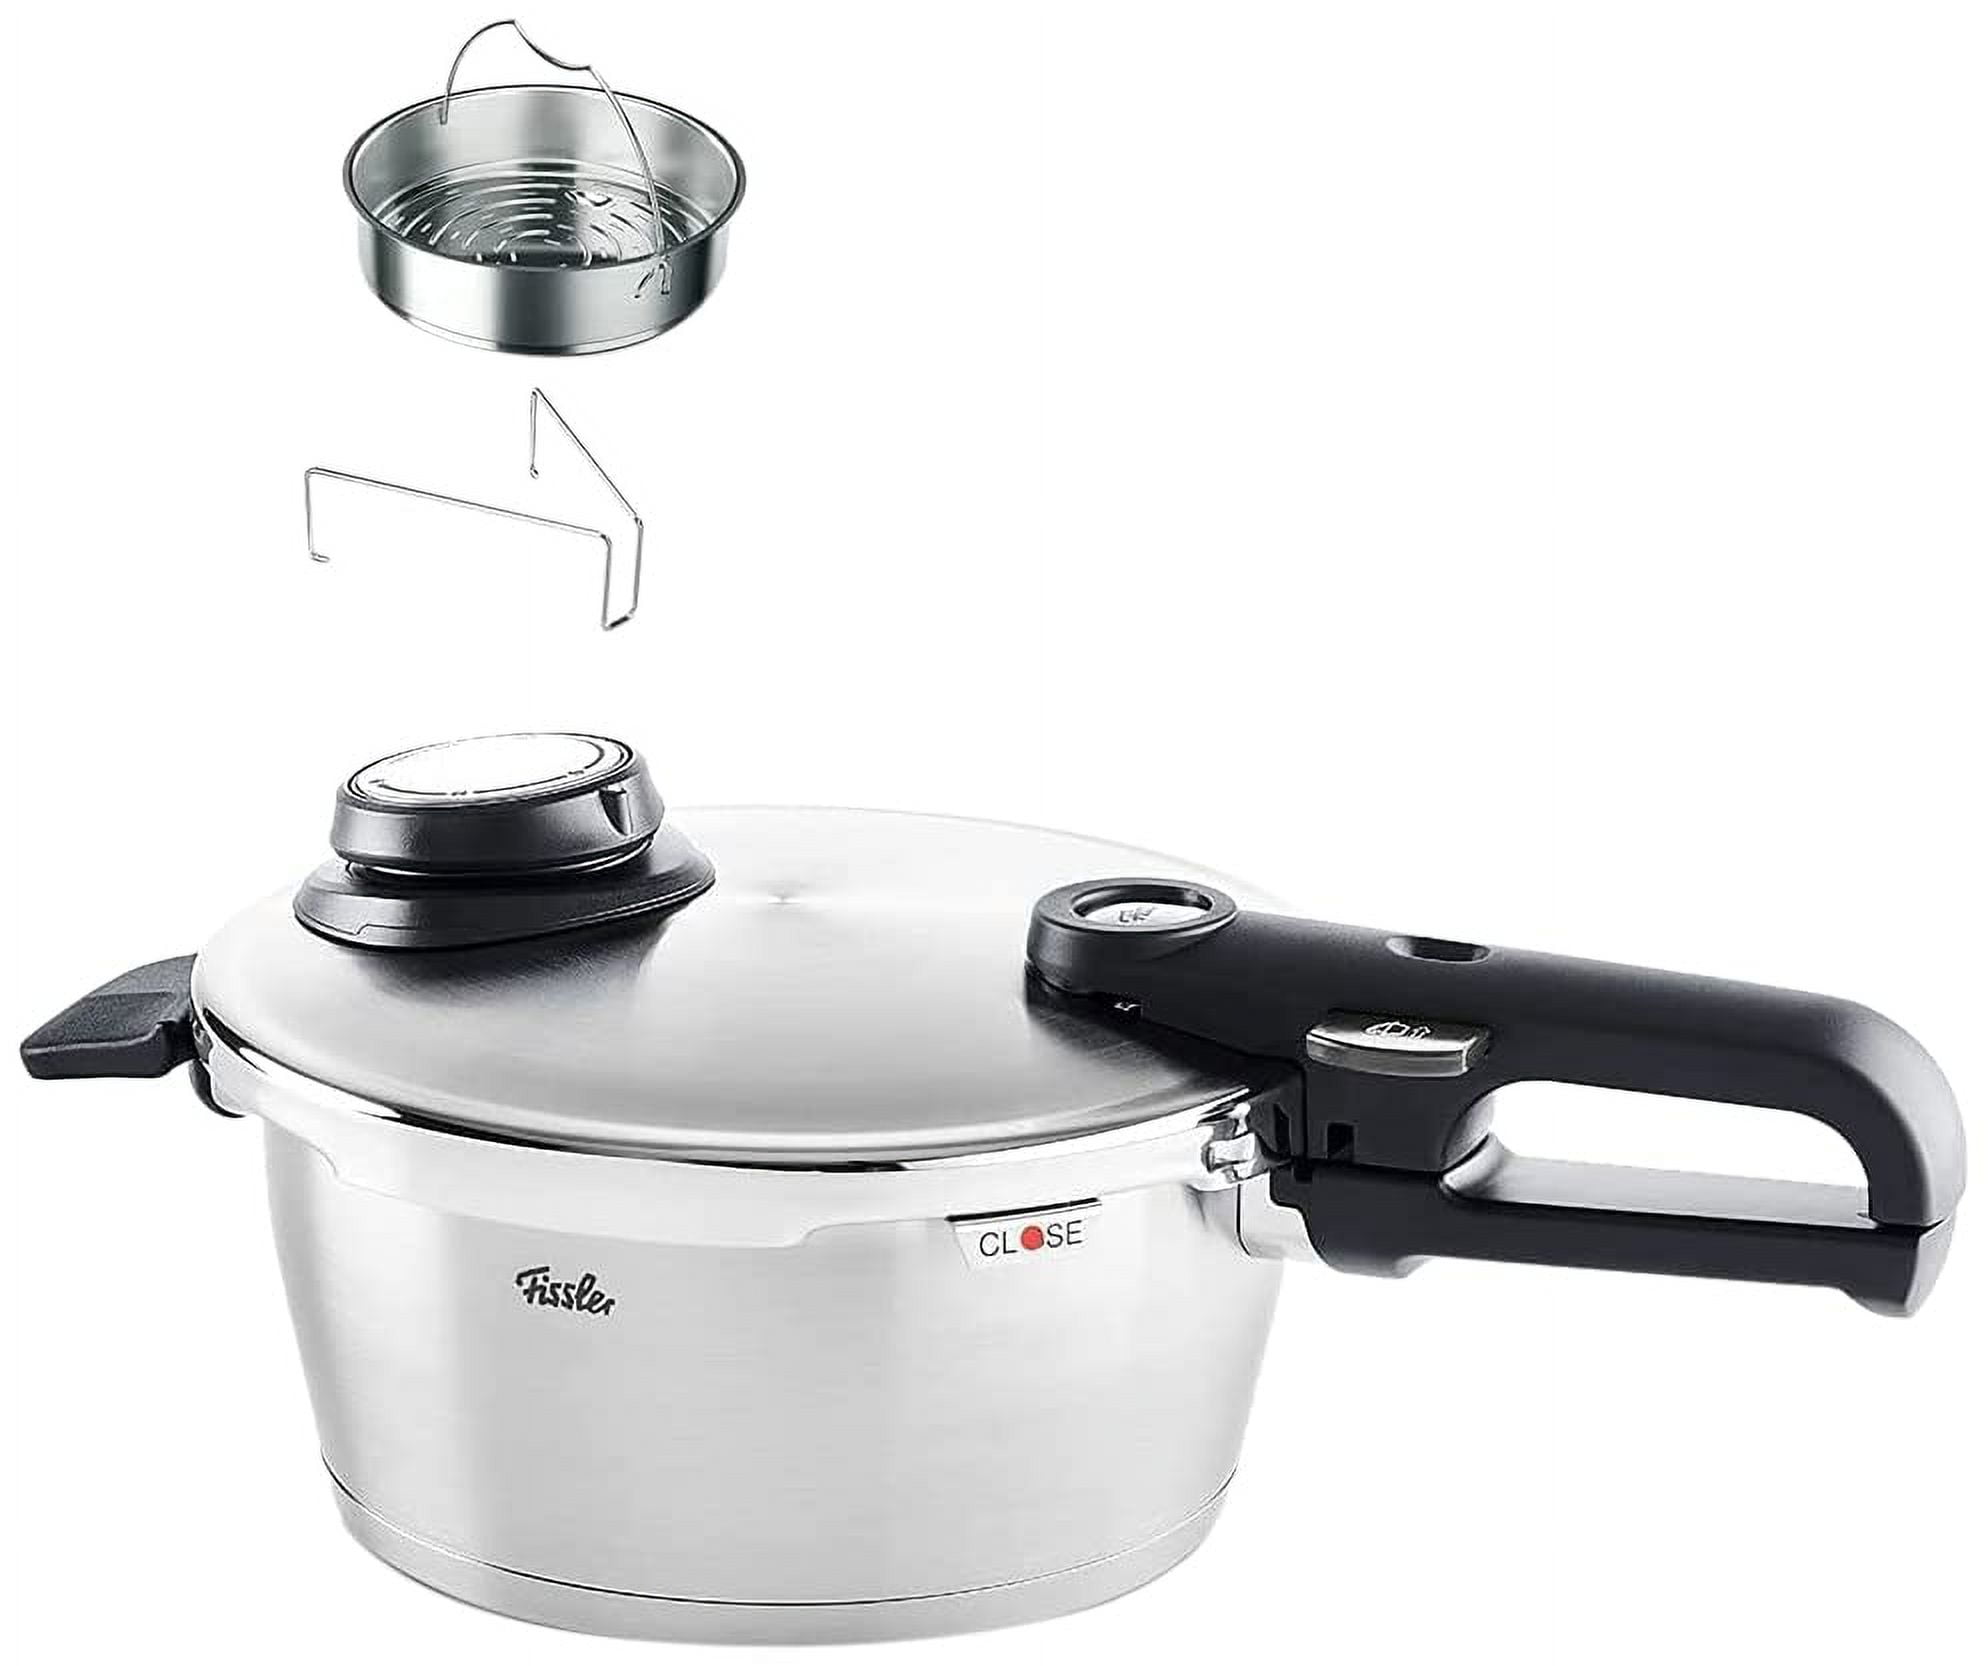 Fissler Vitabit Premium Pressure Cooker, 2.5L, Gas Fire/IH Compatible,  Suitable for 1 to 2 People, 3 Levels of Pressure Settings, Made in Germany,  622-212-02-070-A, Silver 